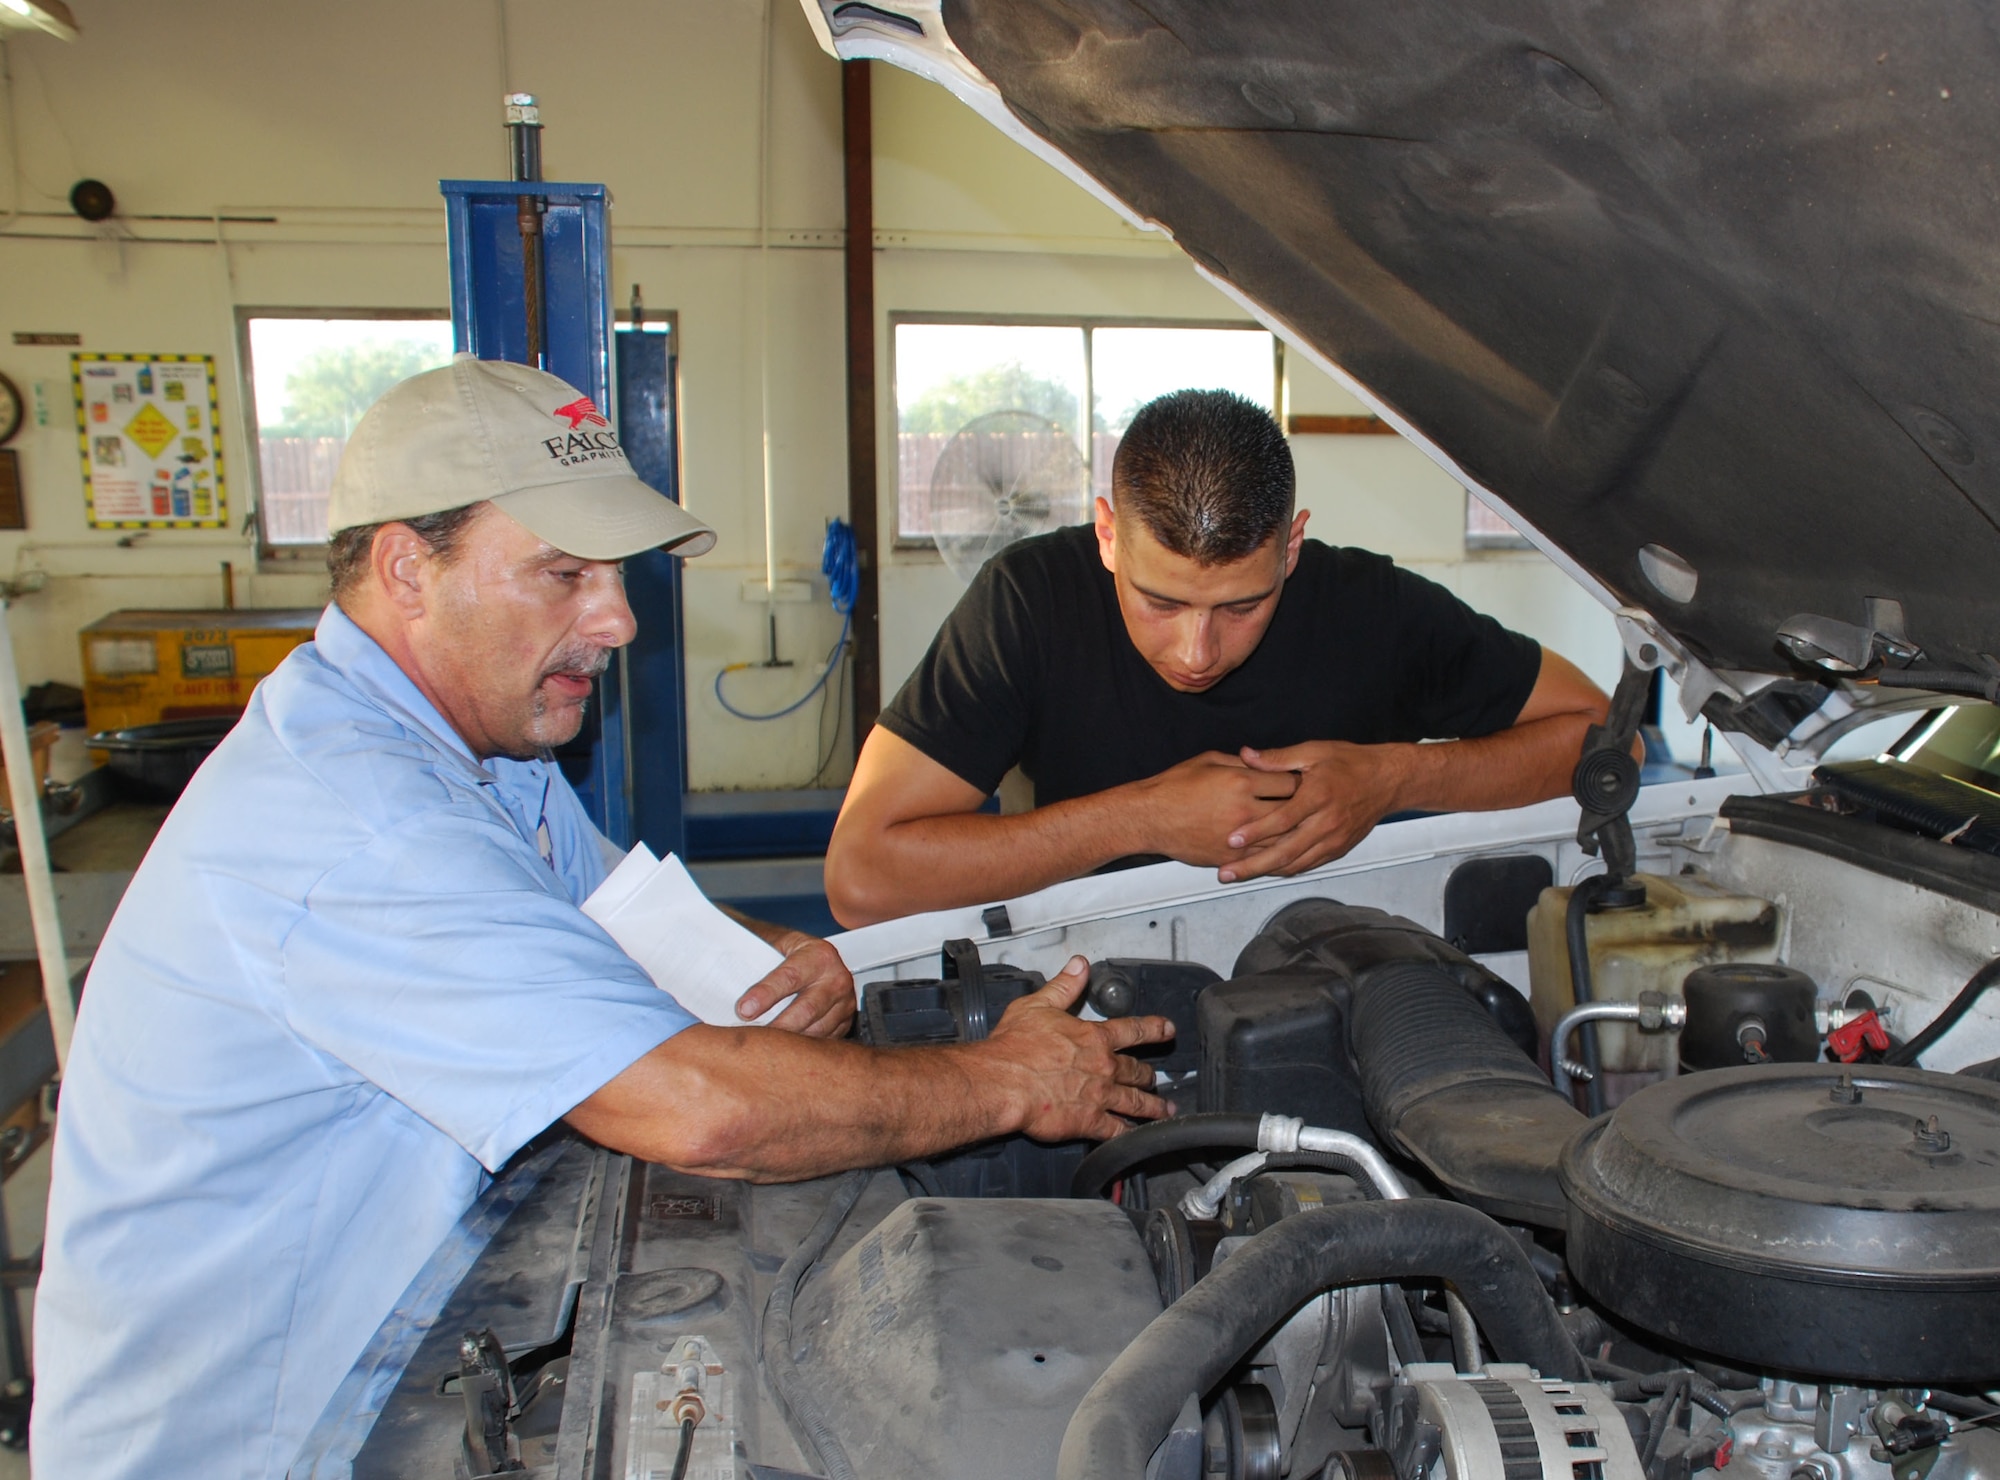 Senior Airman Tony Vitela listens as auto skills center mechanic Scott Ficken teaches Car Care 101 Aug. 14. The class is designed for the those with little to no knowledge of automobiles and basic maintenance. (U.S. Air Force photo/ Airman 1st Class Matthew Varga)